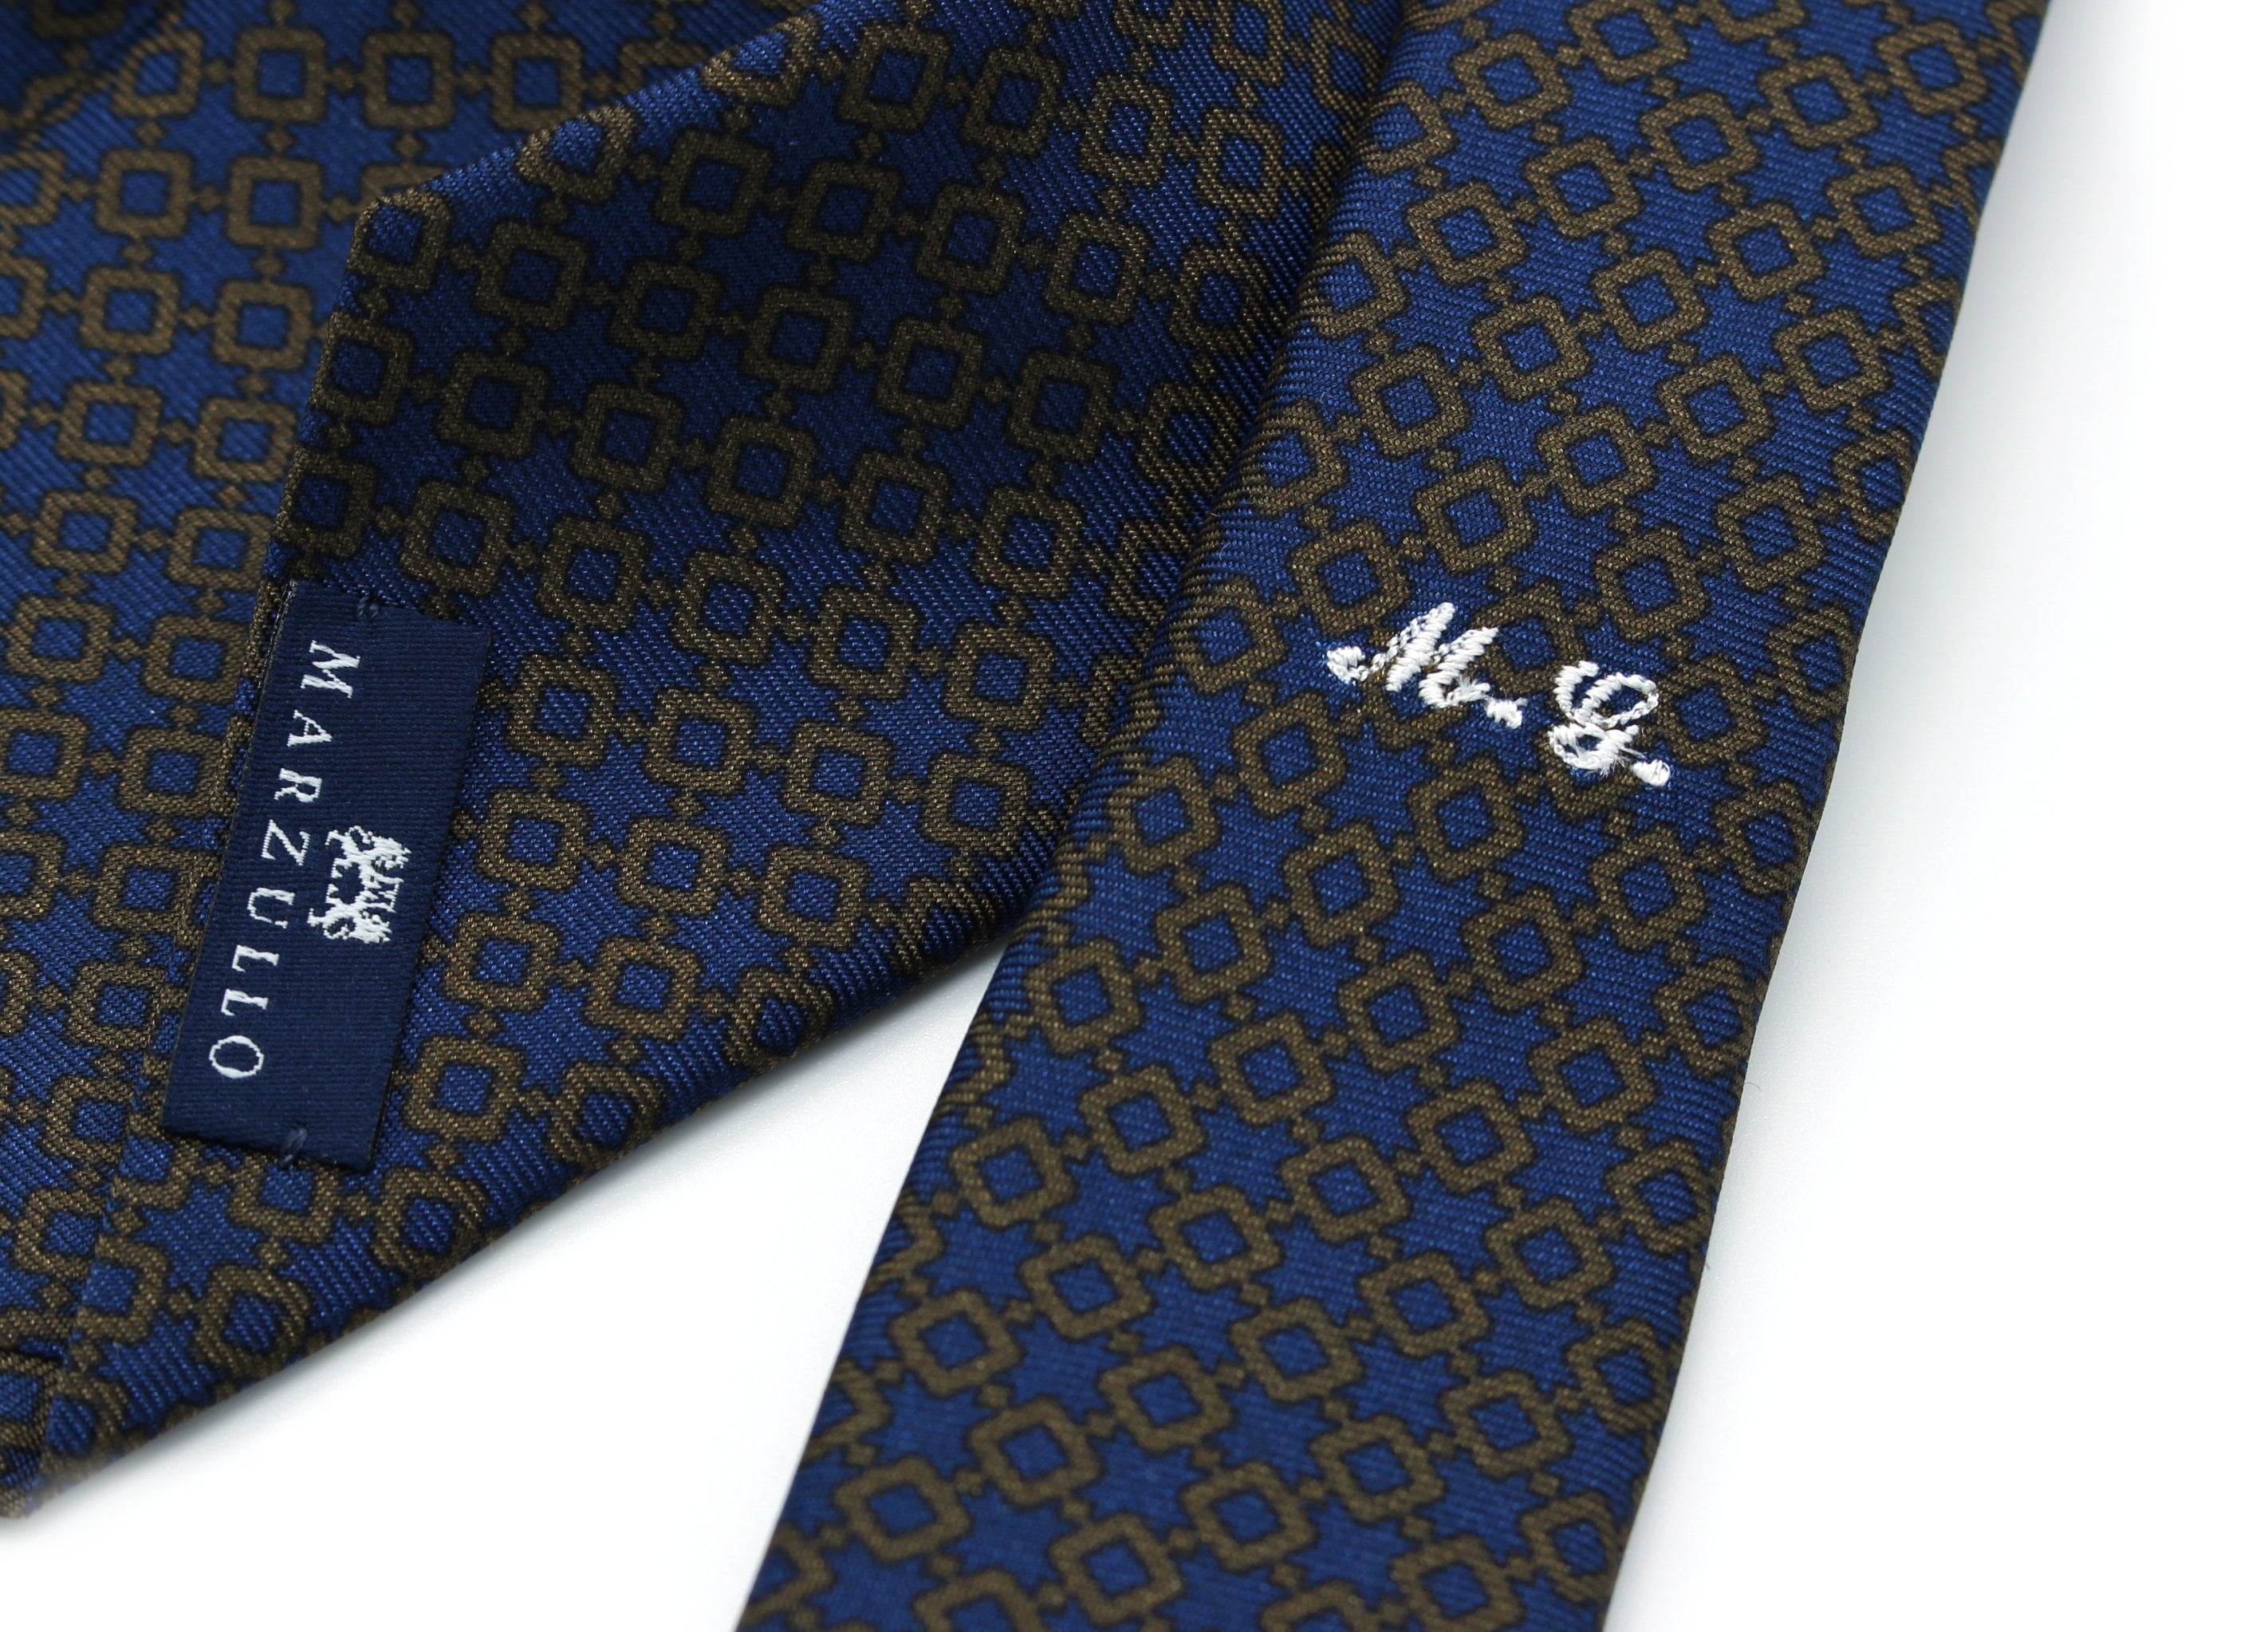 Seven-fold tie made to measure - micro-pattern 9434-4